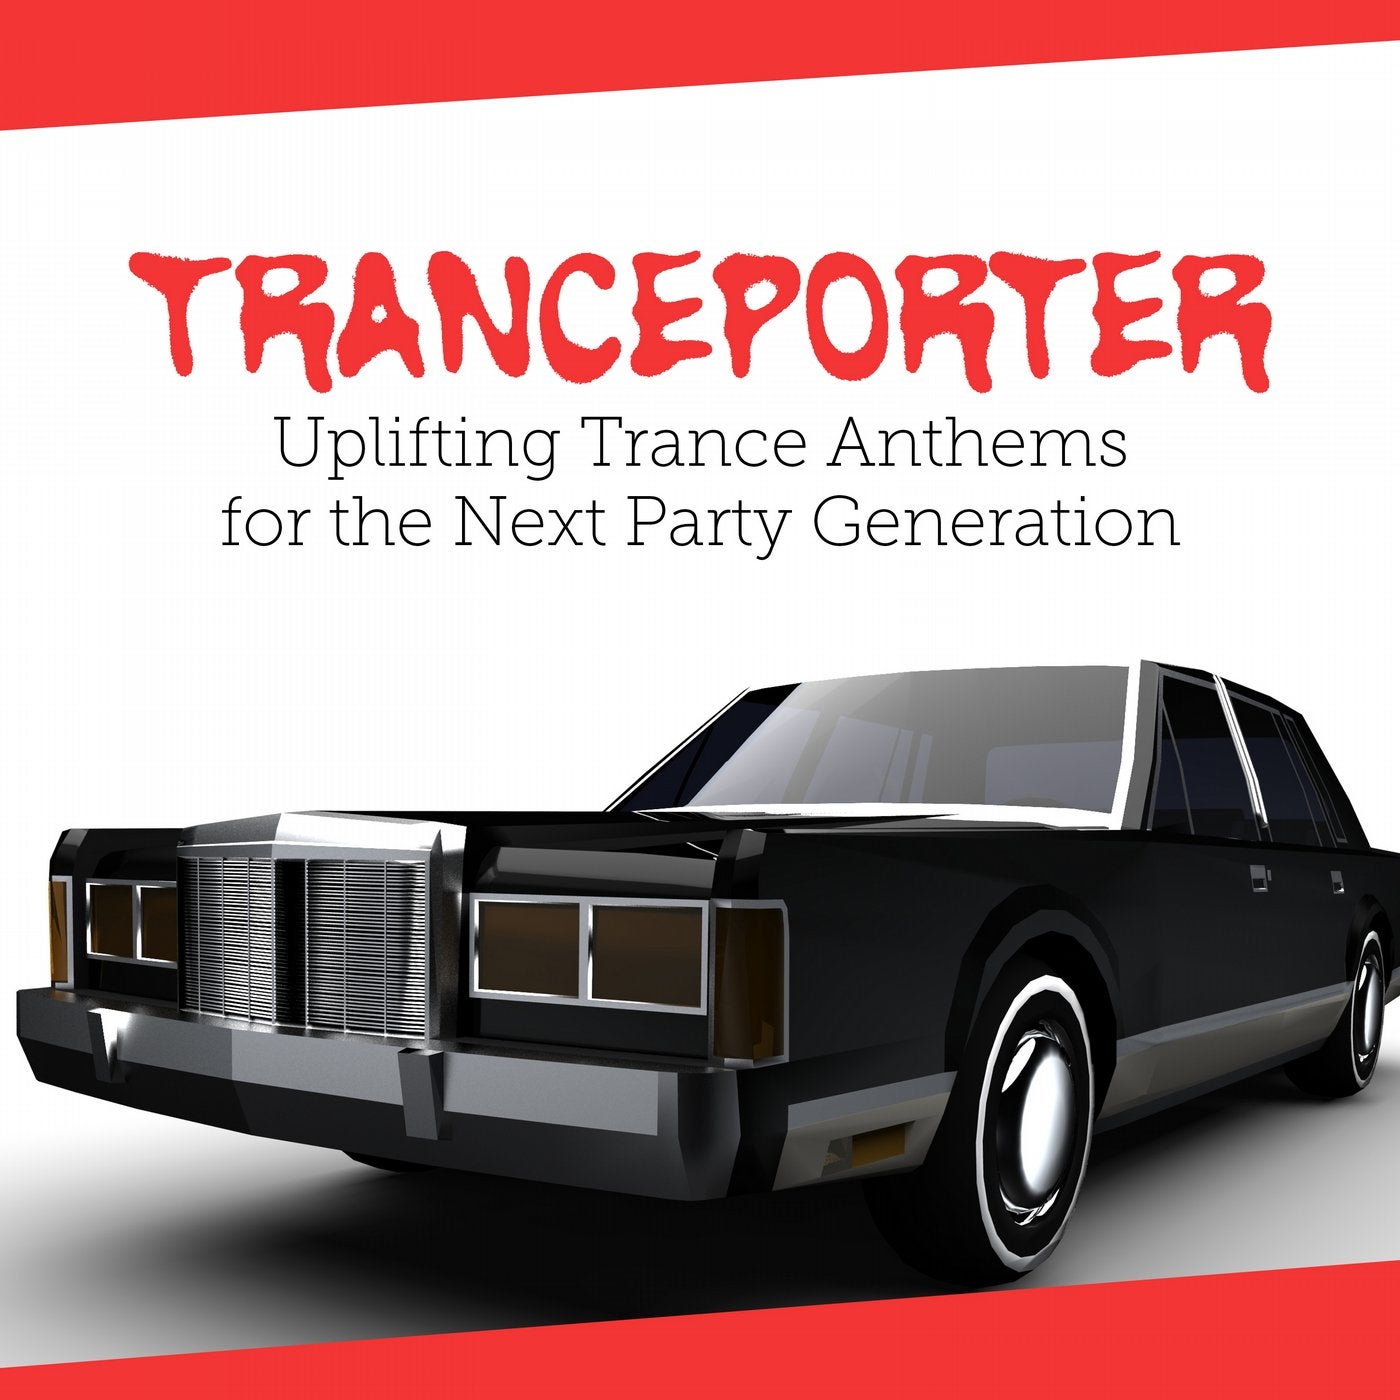 Tranceporter: Uplifting Trance Anthems for the Next Party Generation